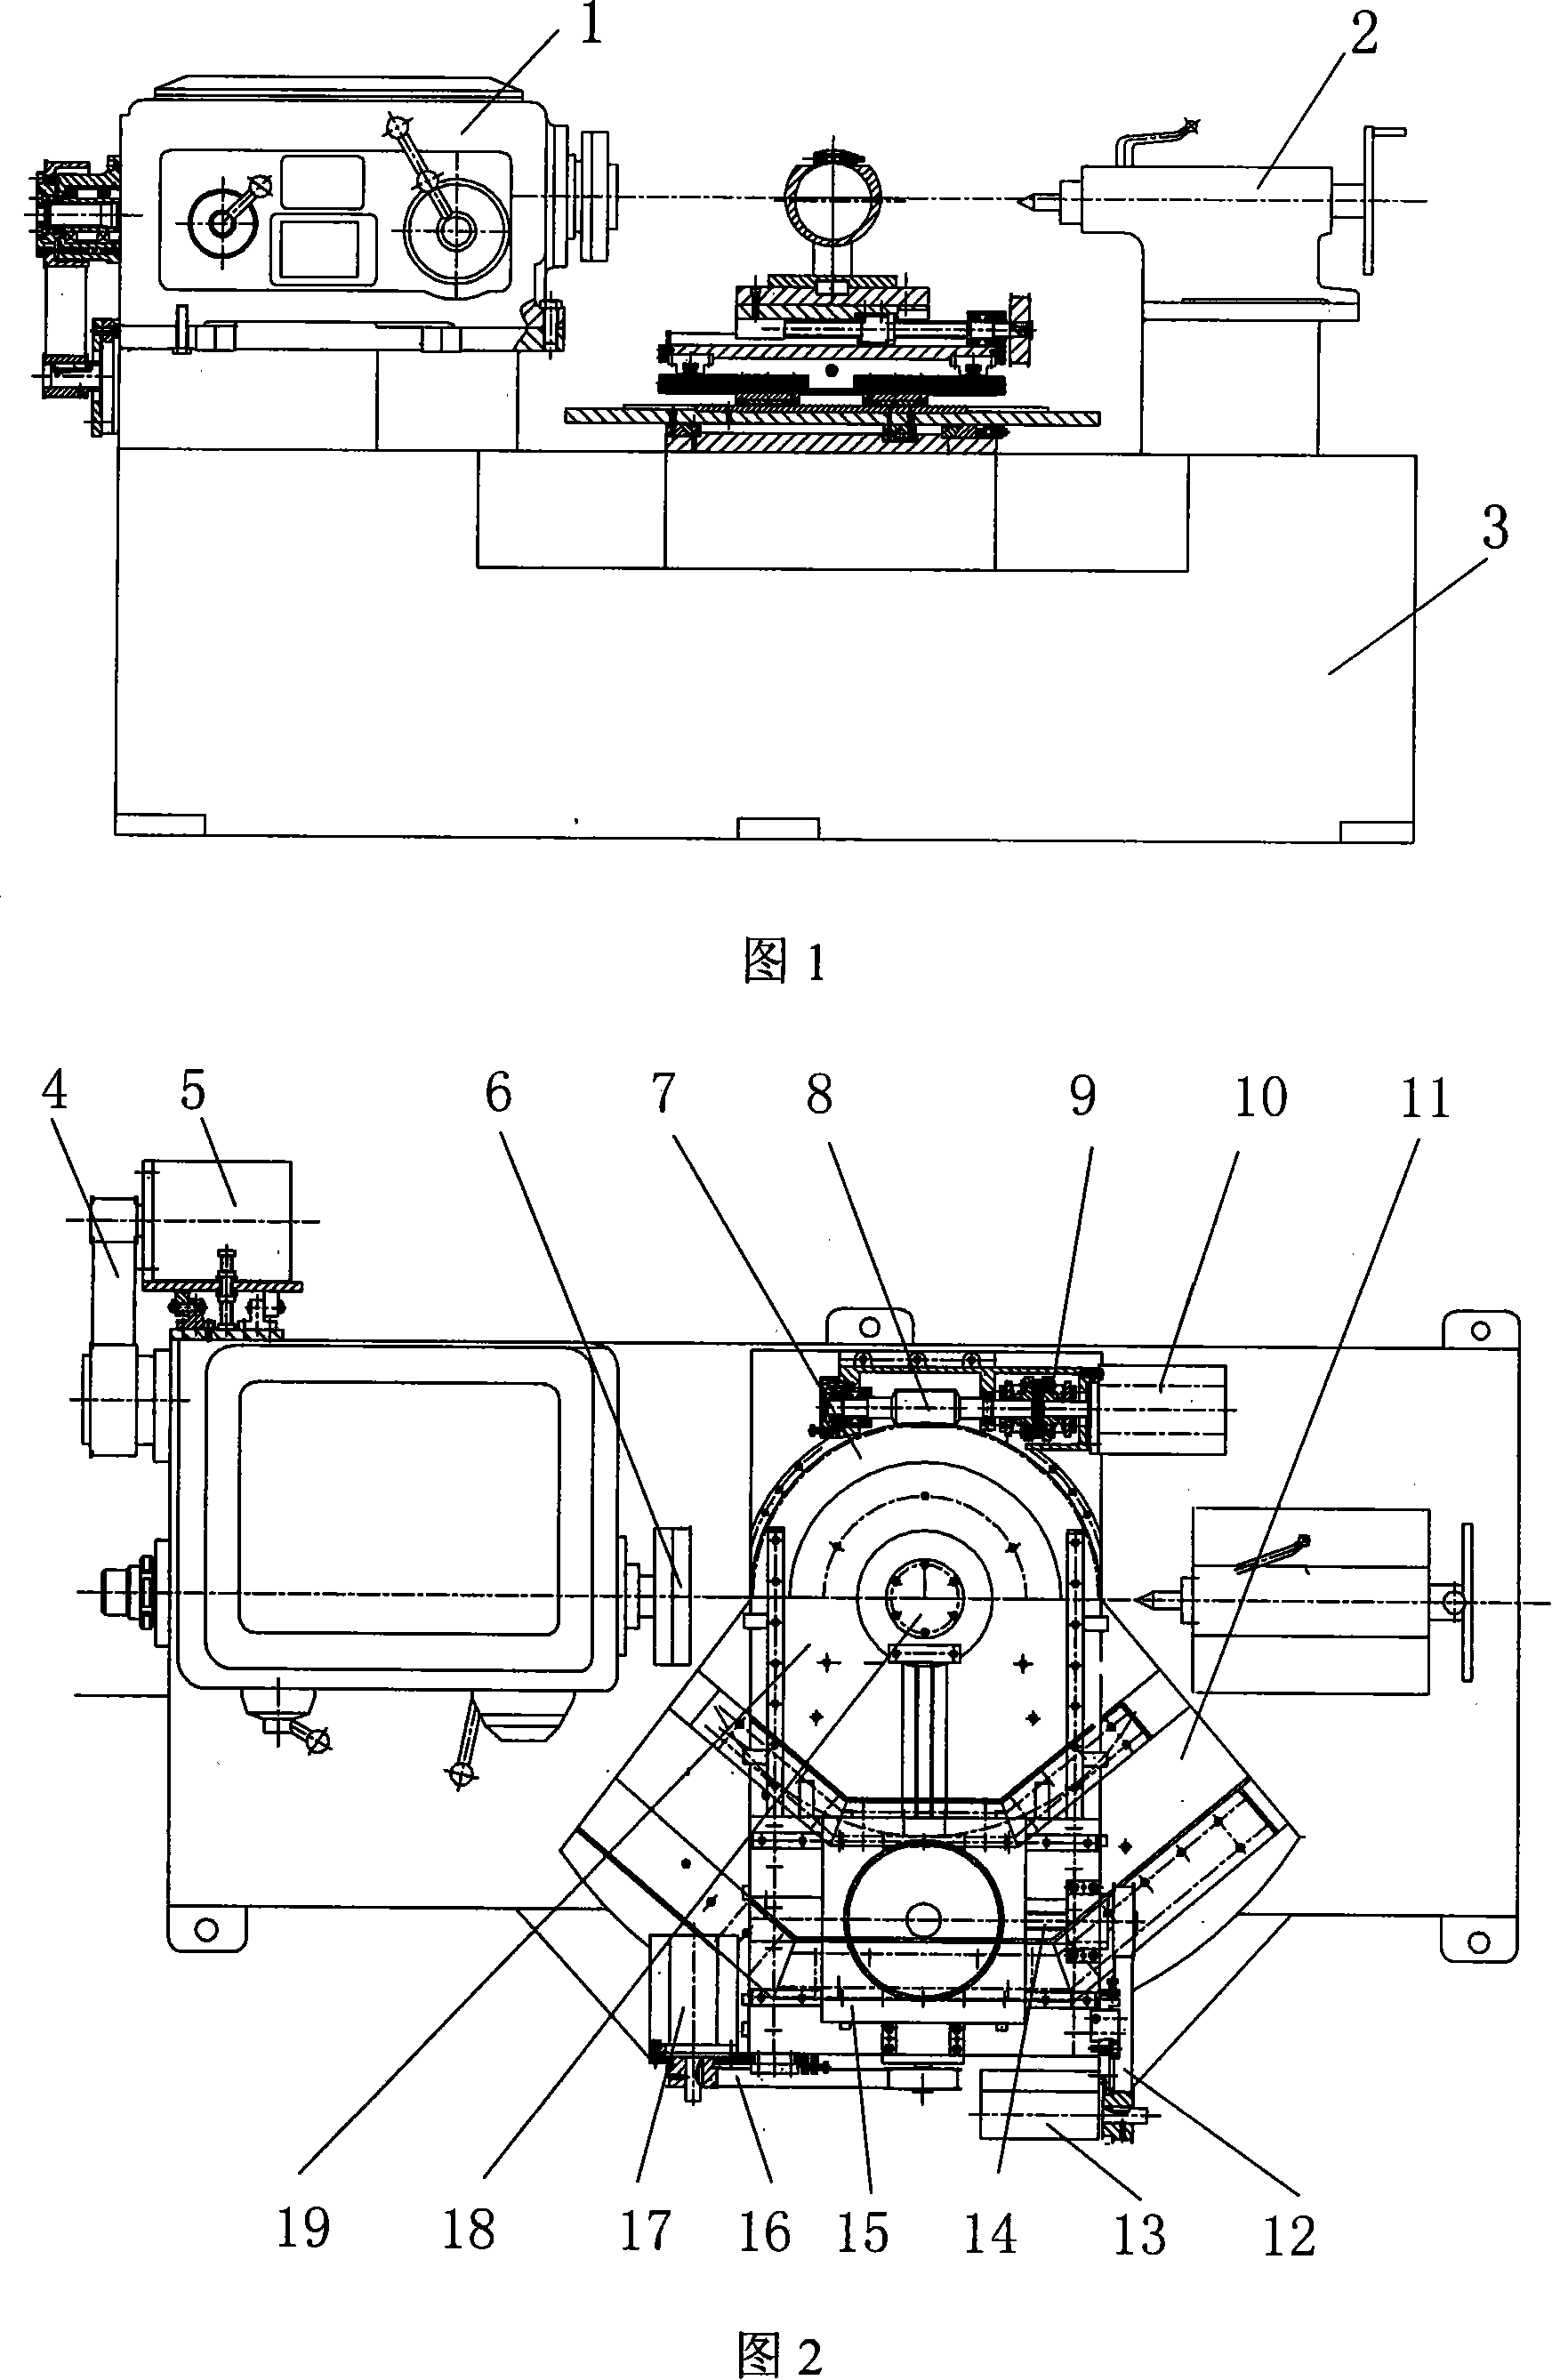 Four-shaft numerically controlled ellipsoidal and spherical hobbing cutter spade milling machine tool